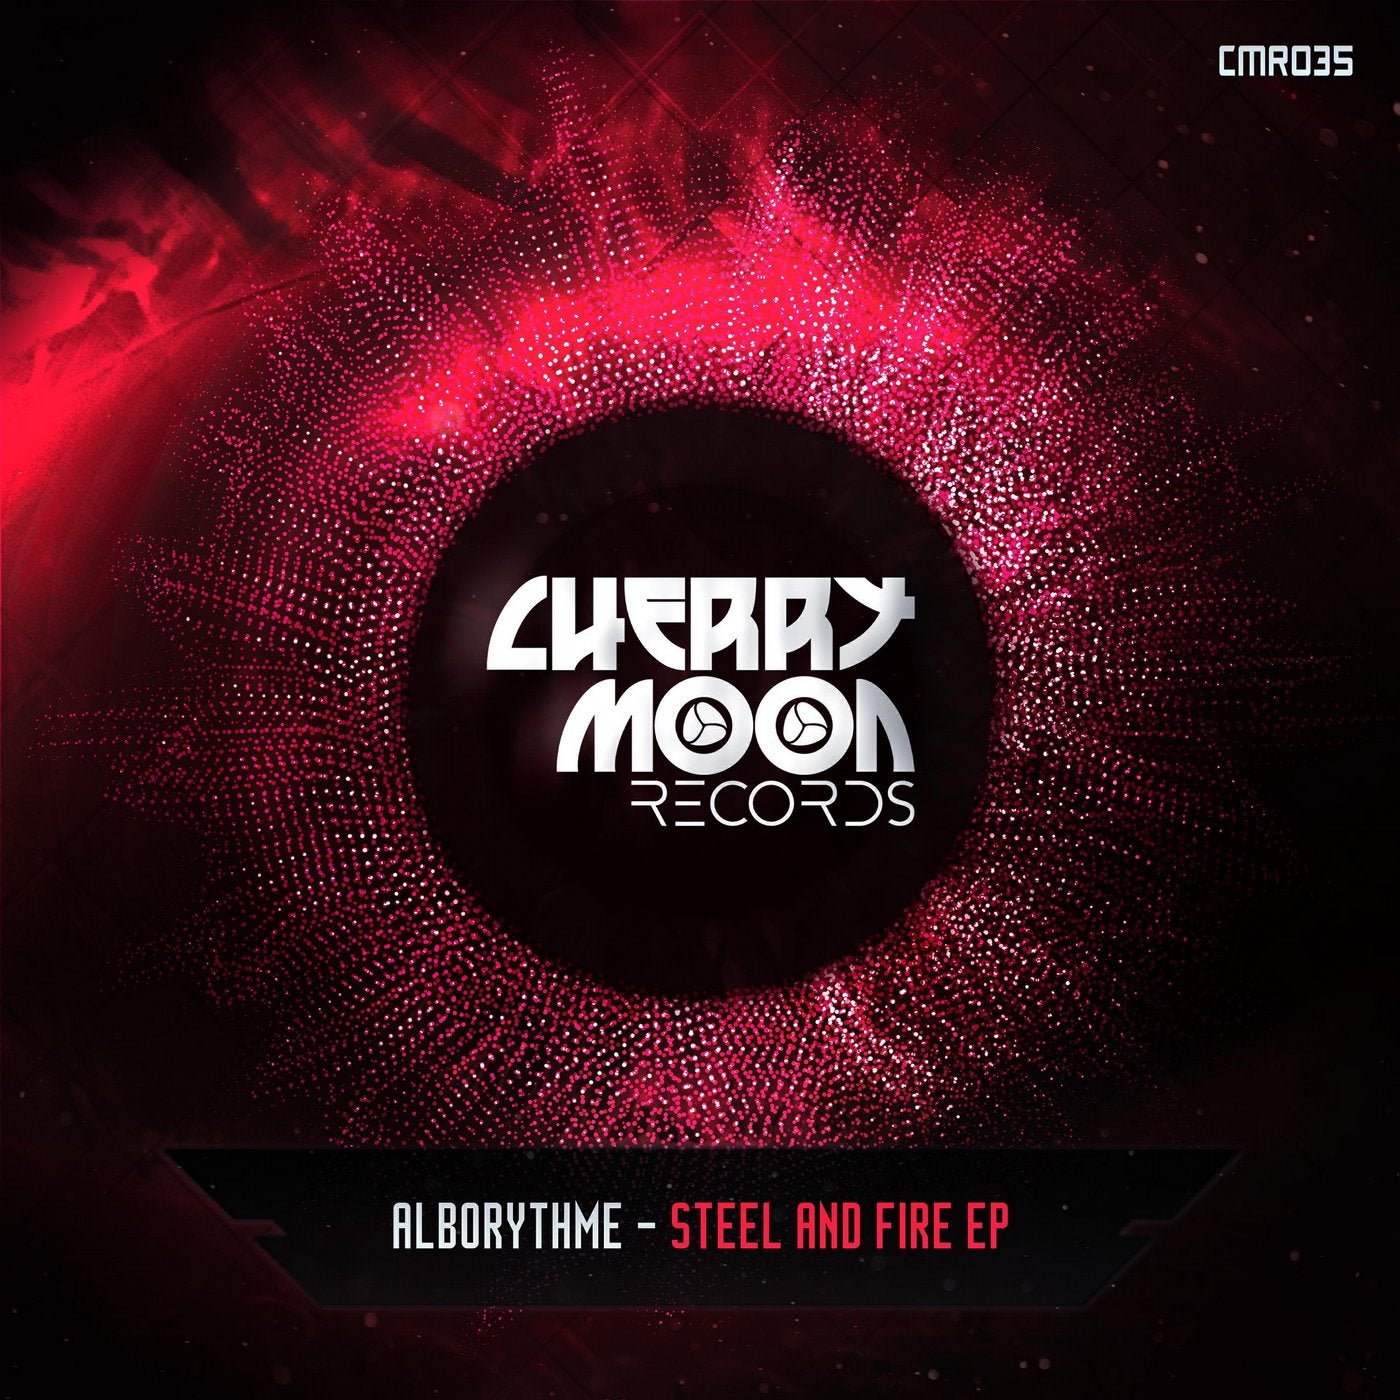 Steel and Fire EP